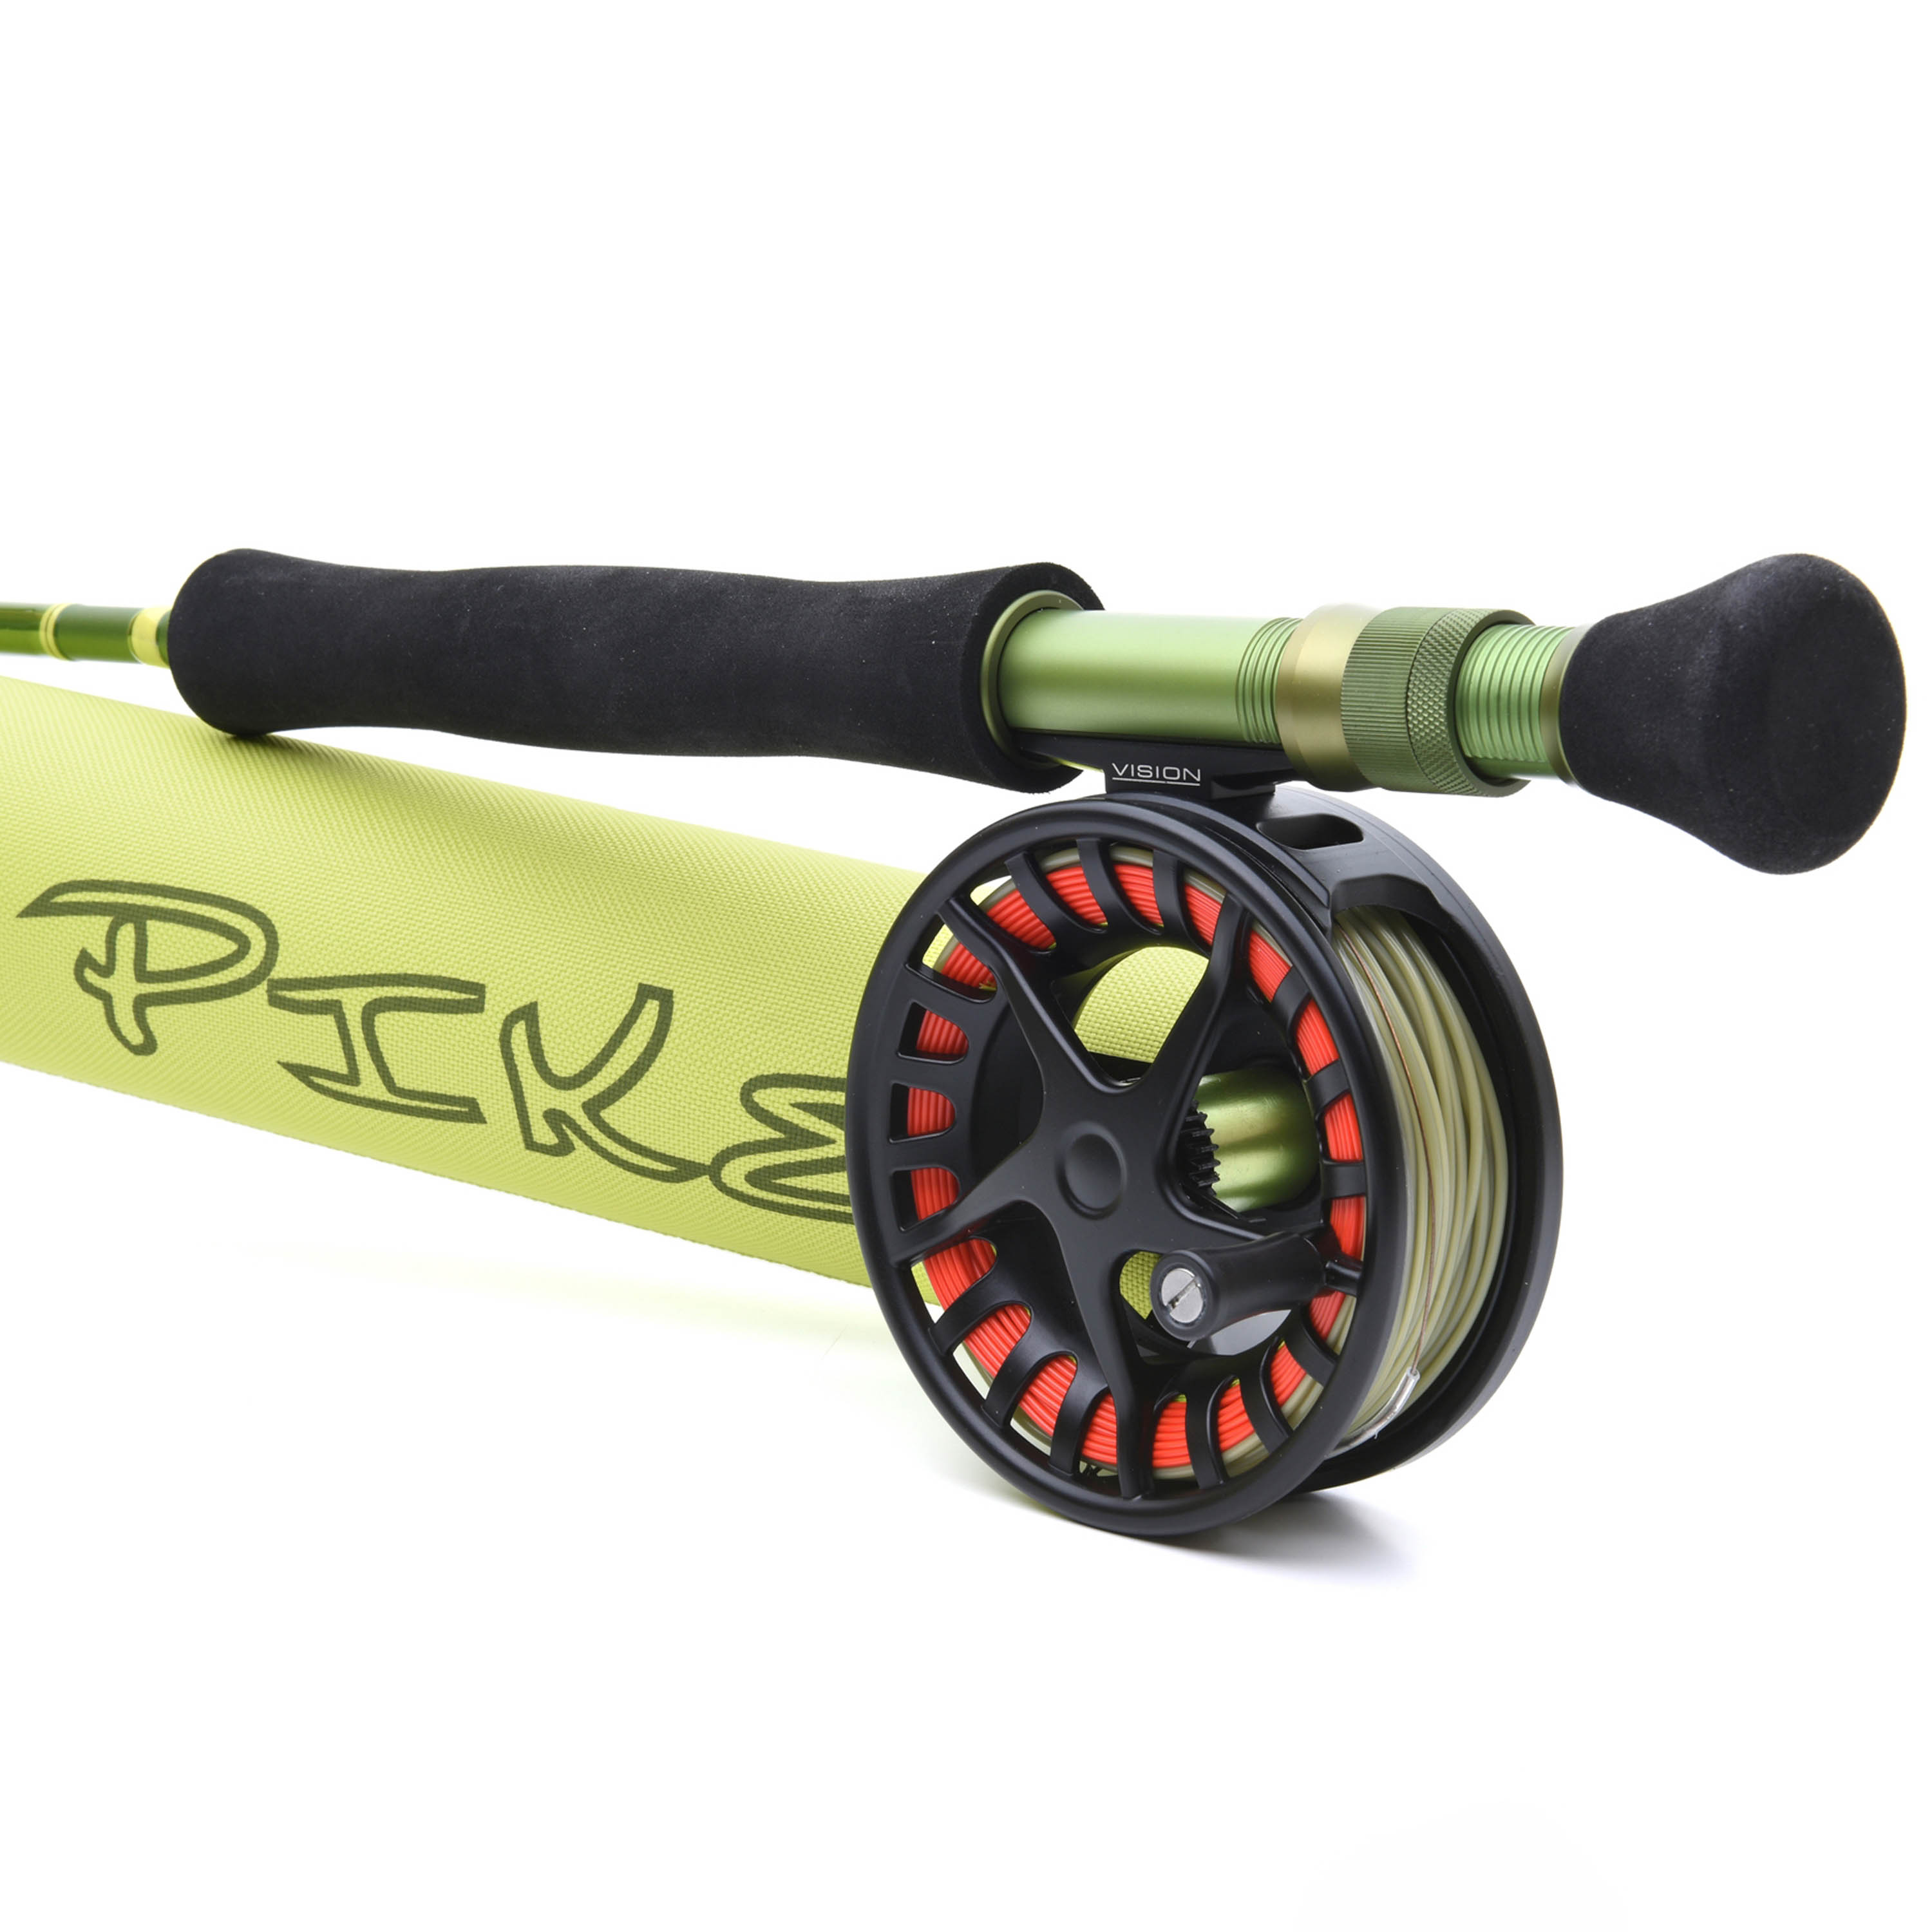 Backing for pike fly reel